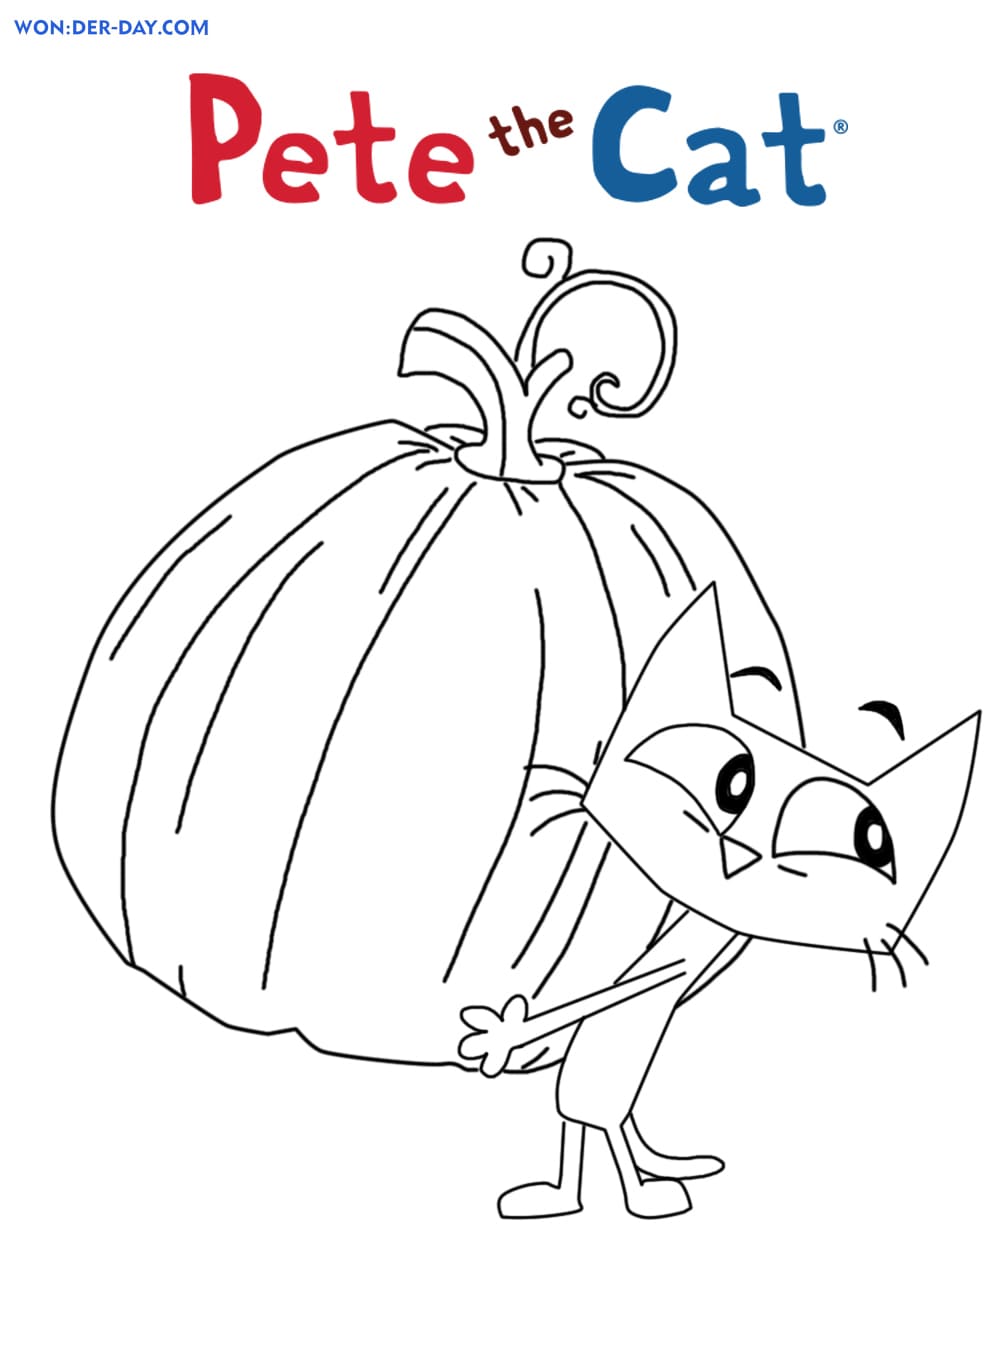 Pete the Cat coloring pages. Free coloring pages | WONDER DAY